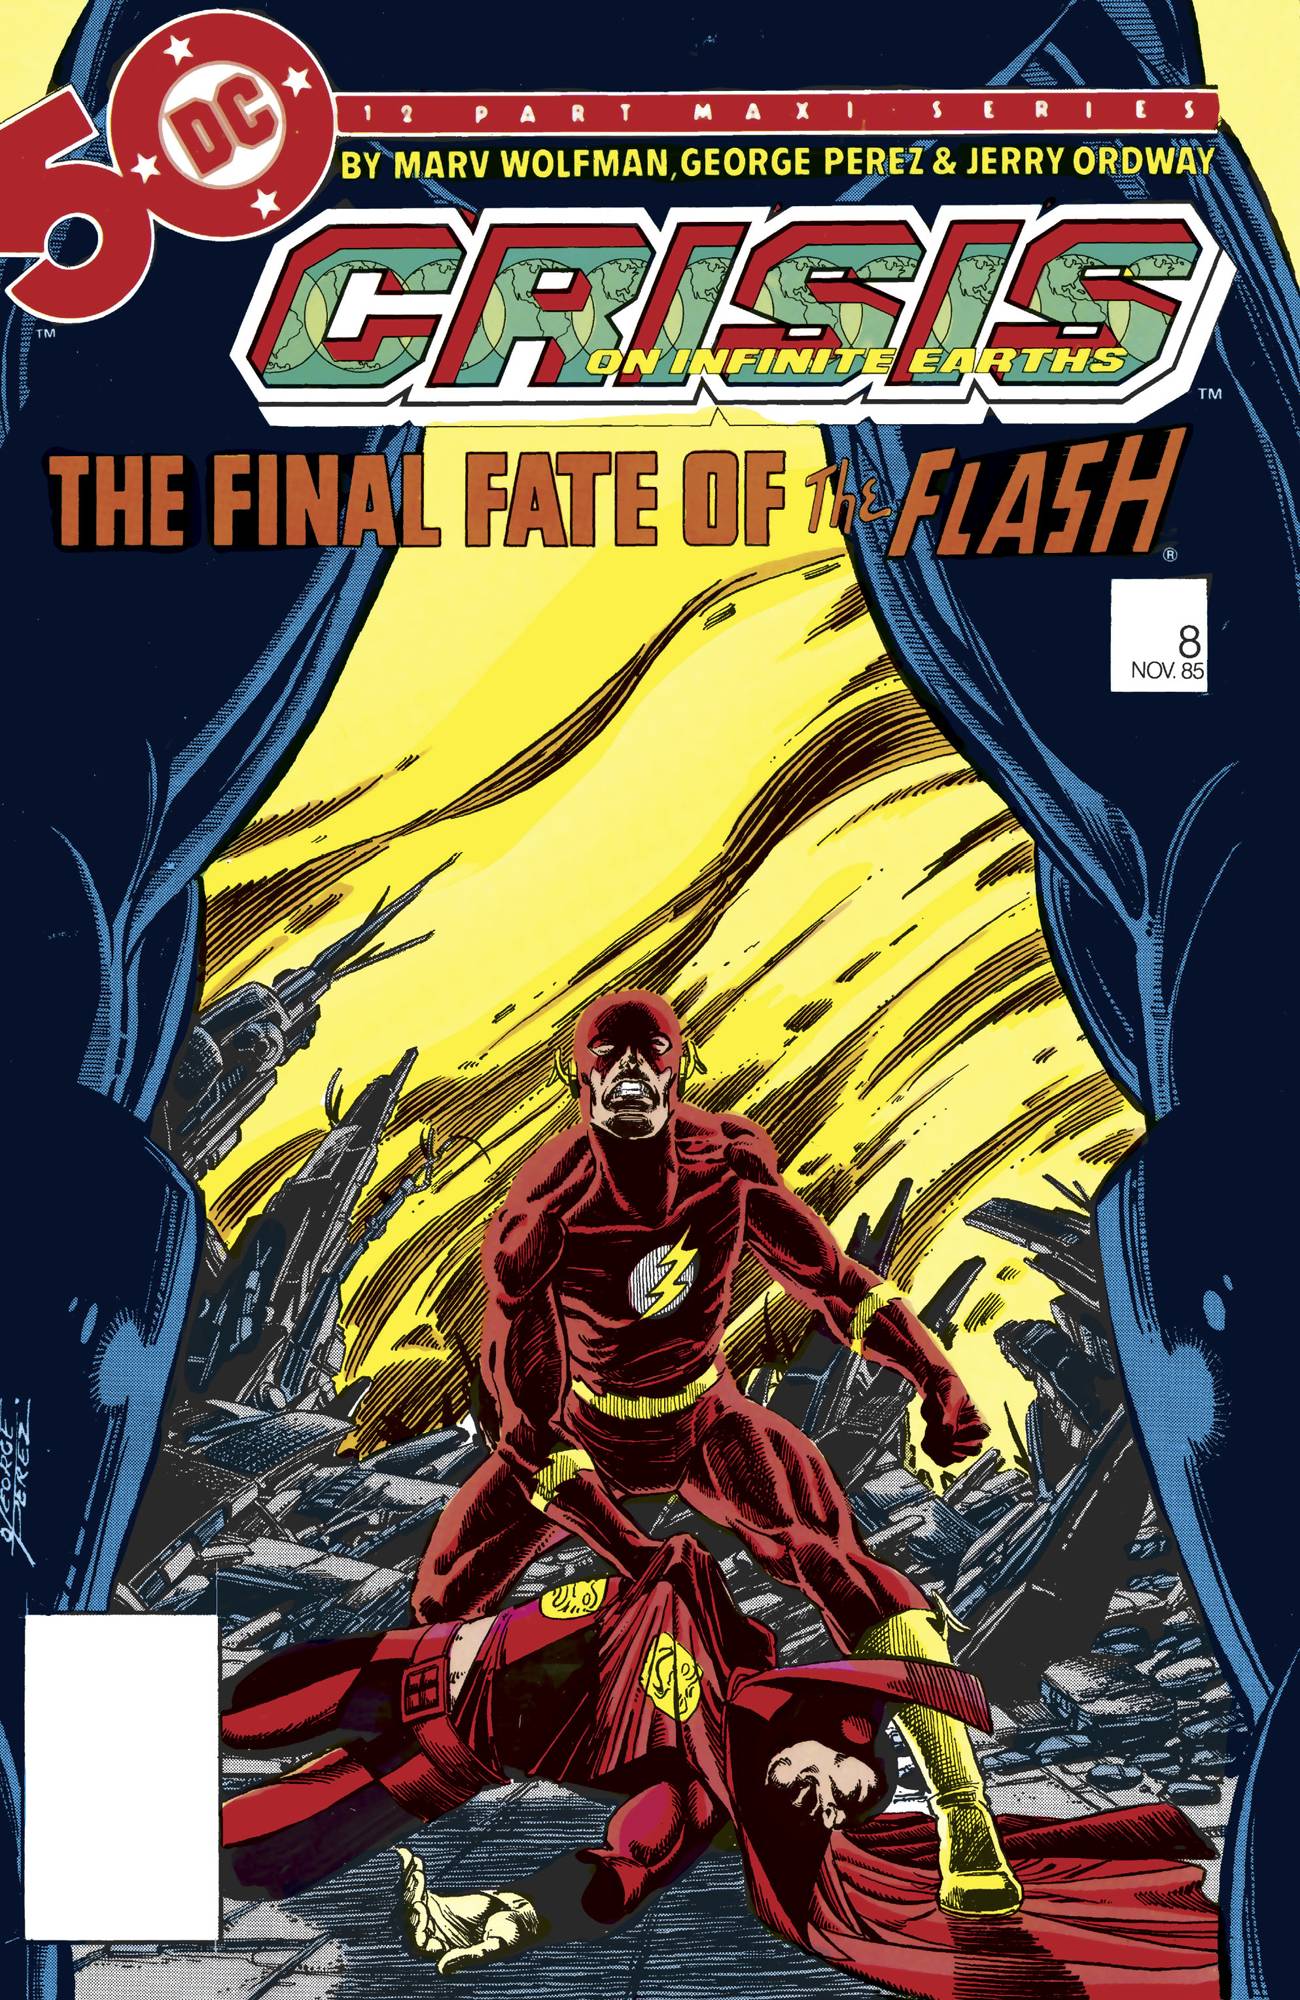 OCT190483 - CRISIS ON INFINITE EARTHS #8 FACSIMILE EDITION - Previews World